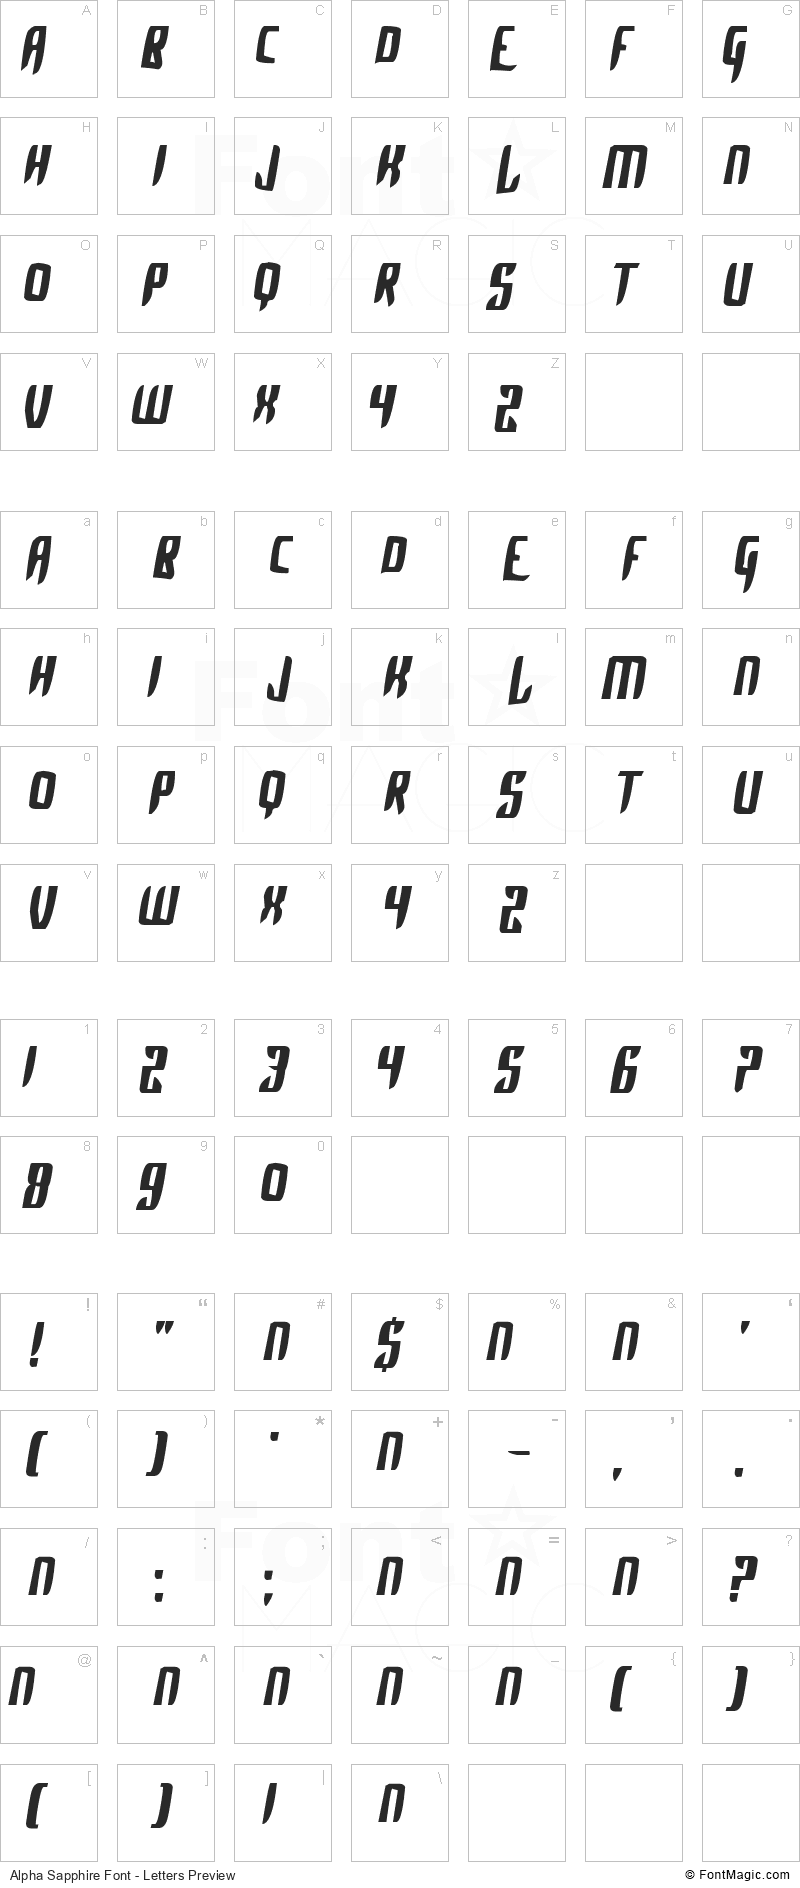 Alpha Sapphire Font - All Latters Preview Chart